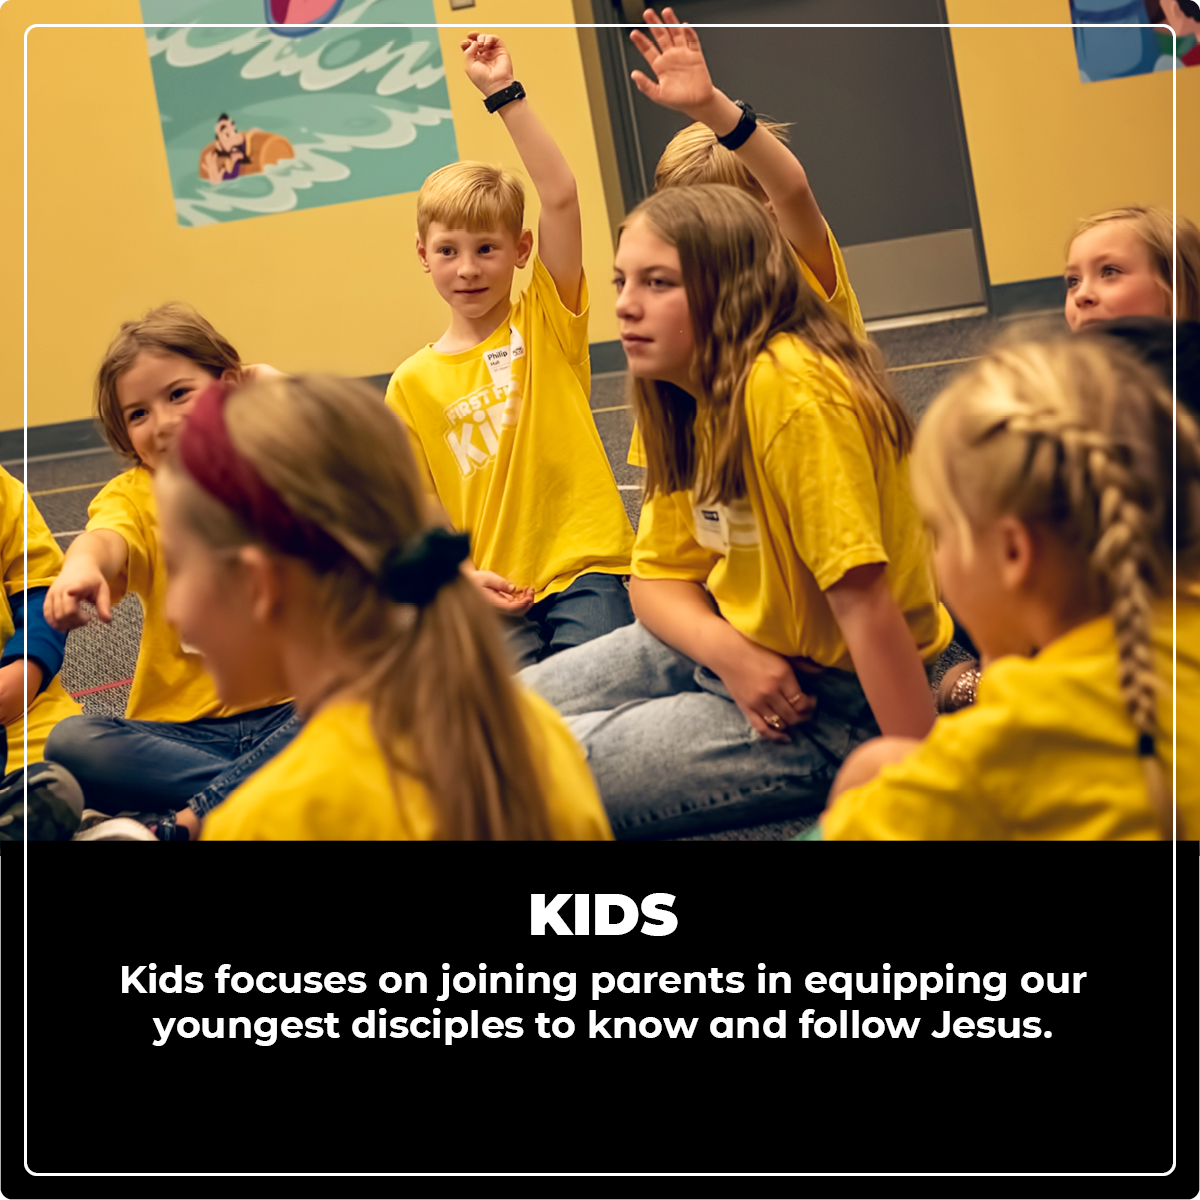 Kids: Kids focuses on joining parents in equipping our youngest disciples to know and follow Jesus.